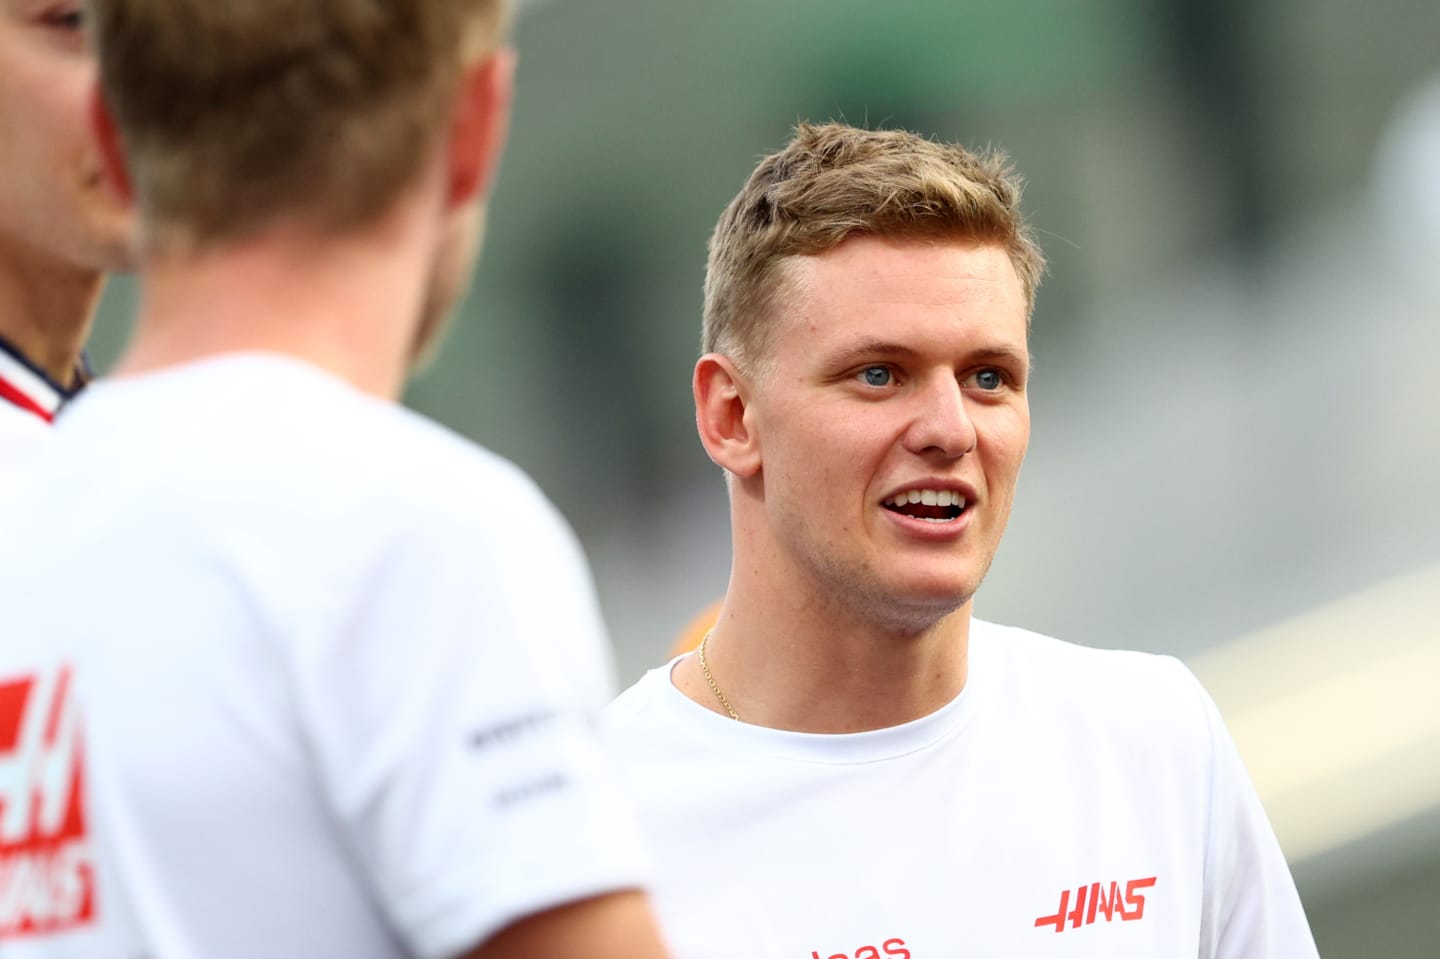 JEDDAH, SAUDI ARABIA - MARCH 27: Mick Schumacher of Germany and Haas F1 looks on from the drivers parade ahead of the F1 Grand Prix of Saudi Arabia at the Jeddah Corniche Circuit on March 27, 2022 in Jeddah, Saudi Arabia. (Photo by Clive Rose - Formula 1/Formula 1 via Getty Images)